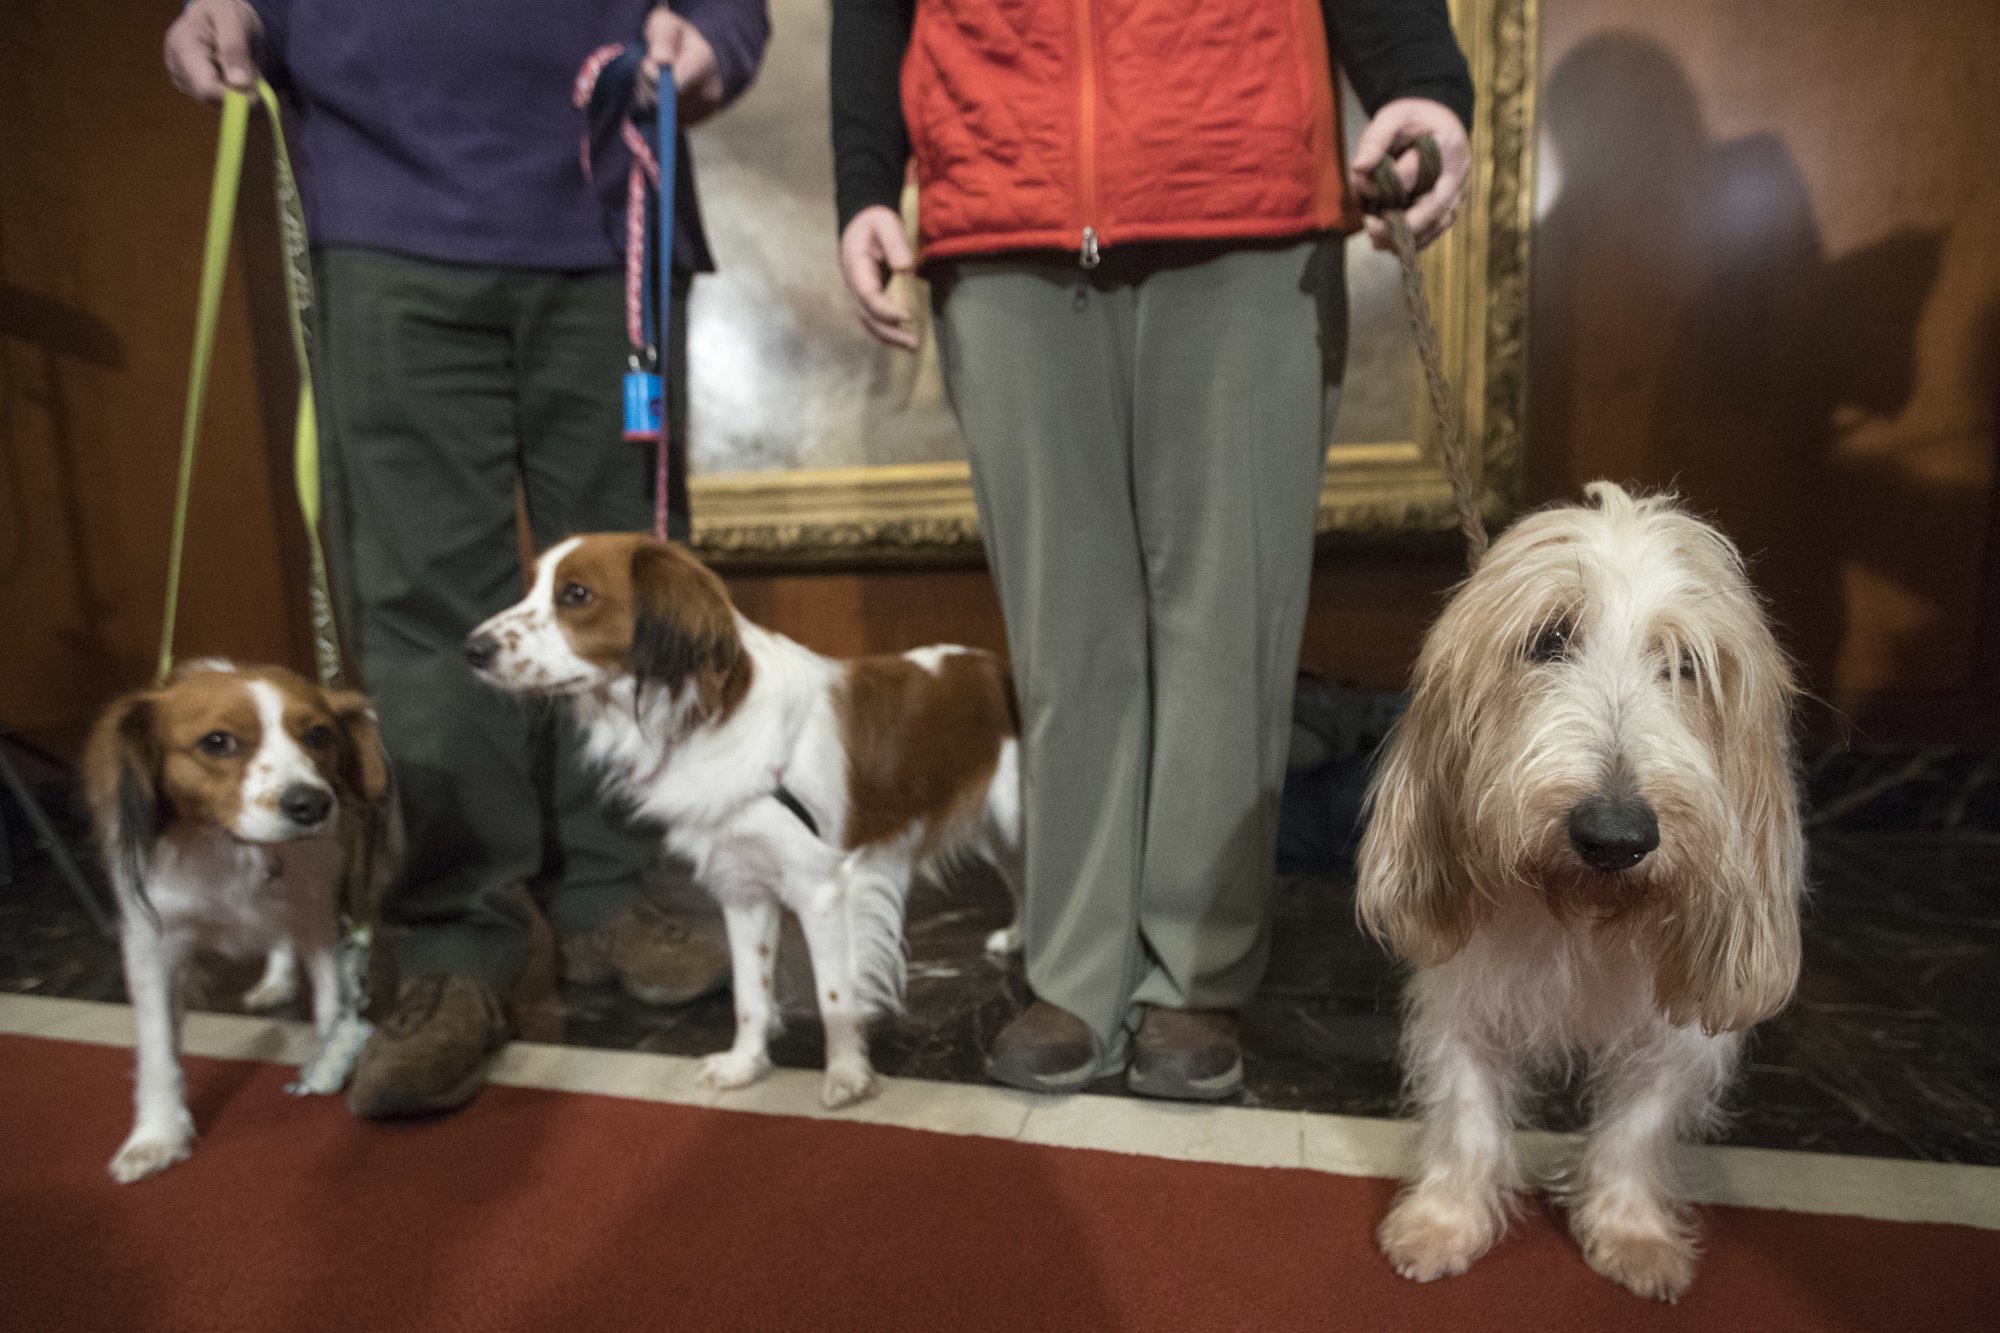 FILE - In this Jan. 10, 2018 file photo, Escher, left, and Rhett, center, Nederlandse kooikerhondje, and Juno, right, a grand basset griffon Vendeen, are shown by their handlers during a news conference at the American Kennel Club headquarters in New York. The two breeds are eligible to compete in the Westminster Kennel Club dog show for the first time in 2019. (AP Photo/Mary Altaffer, File)